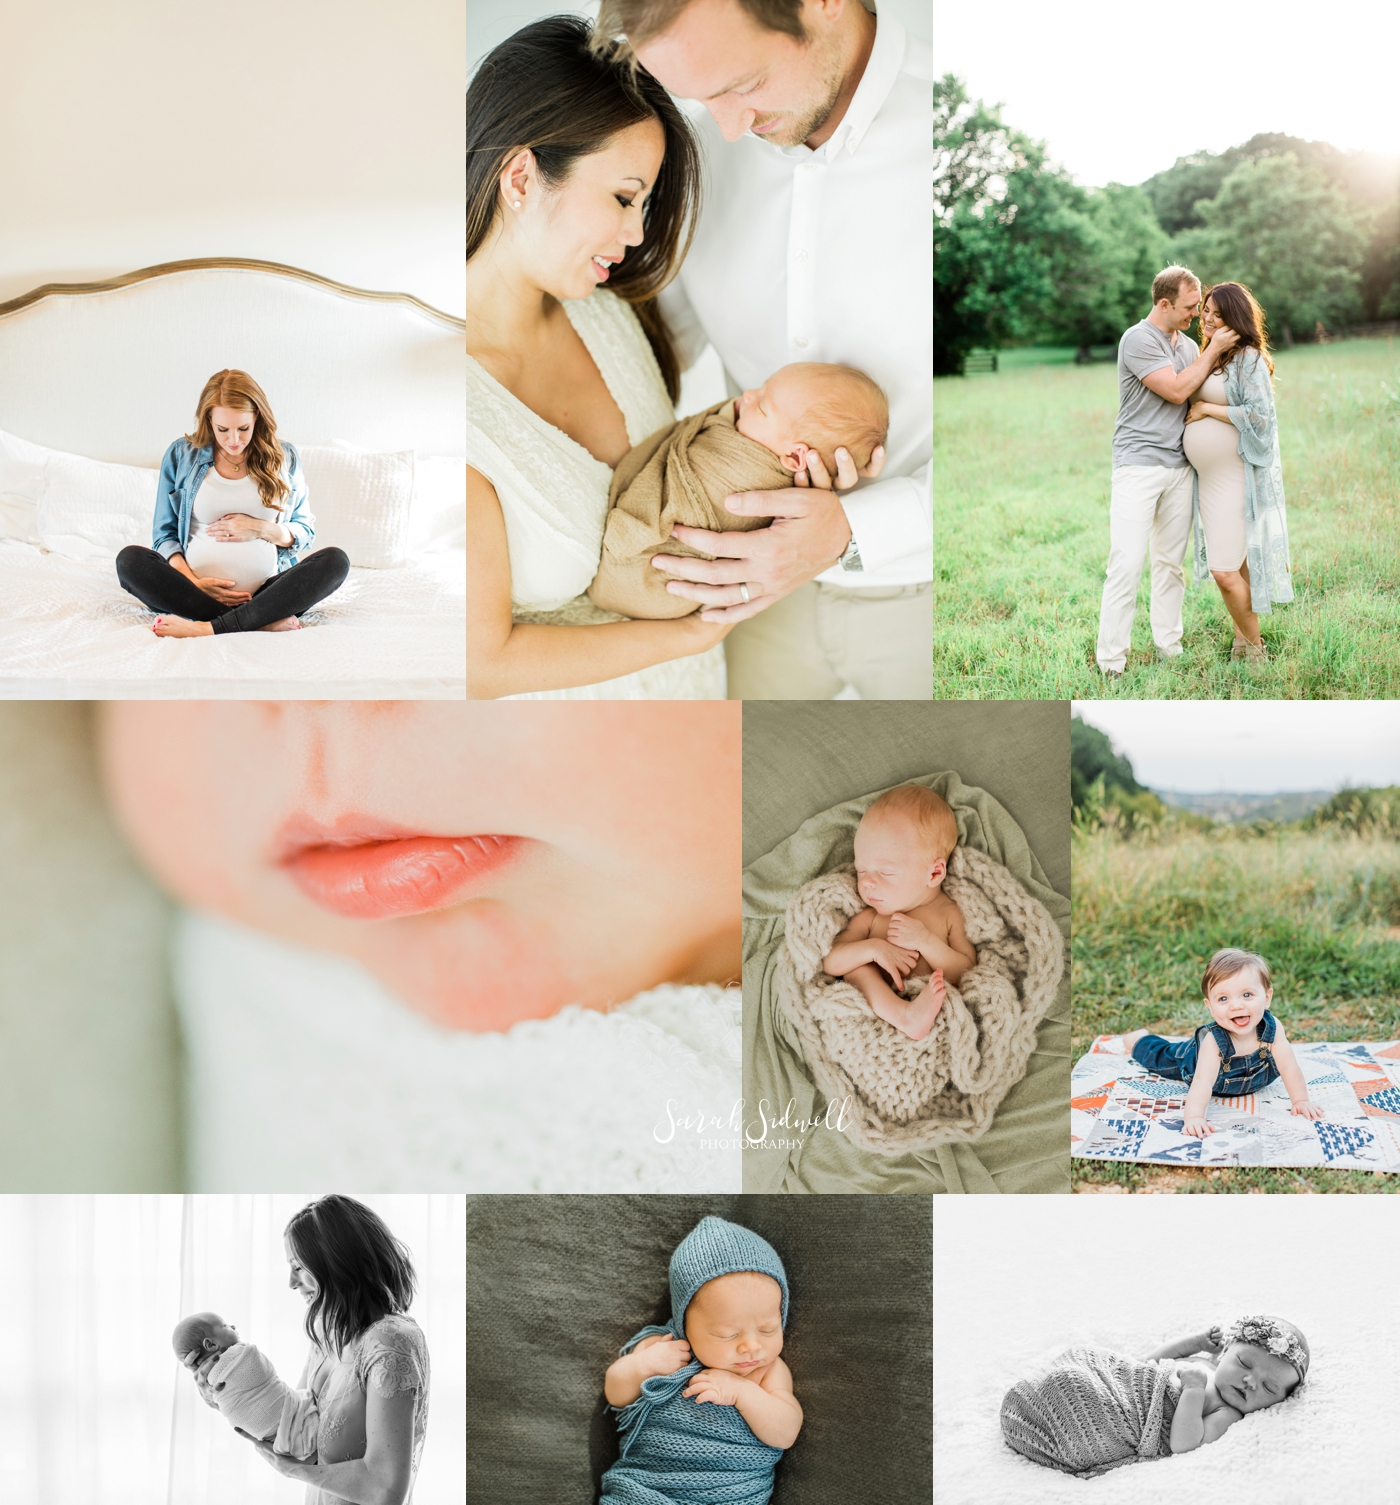 Best of 2017 | Baby Love | Sarah Sidwell Photography